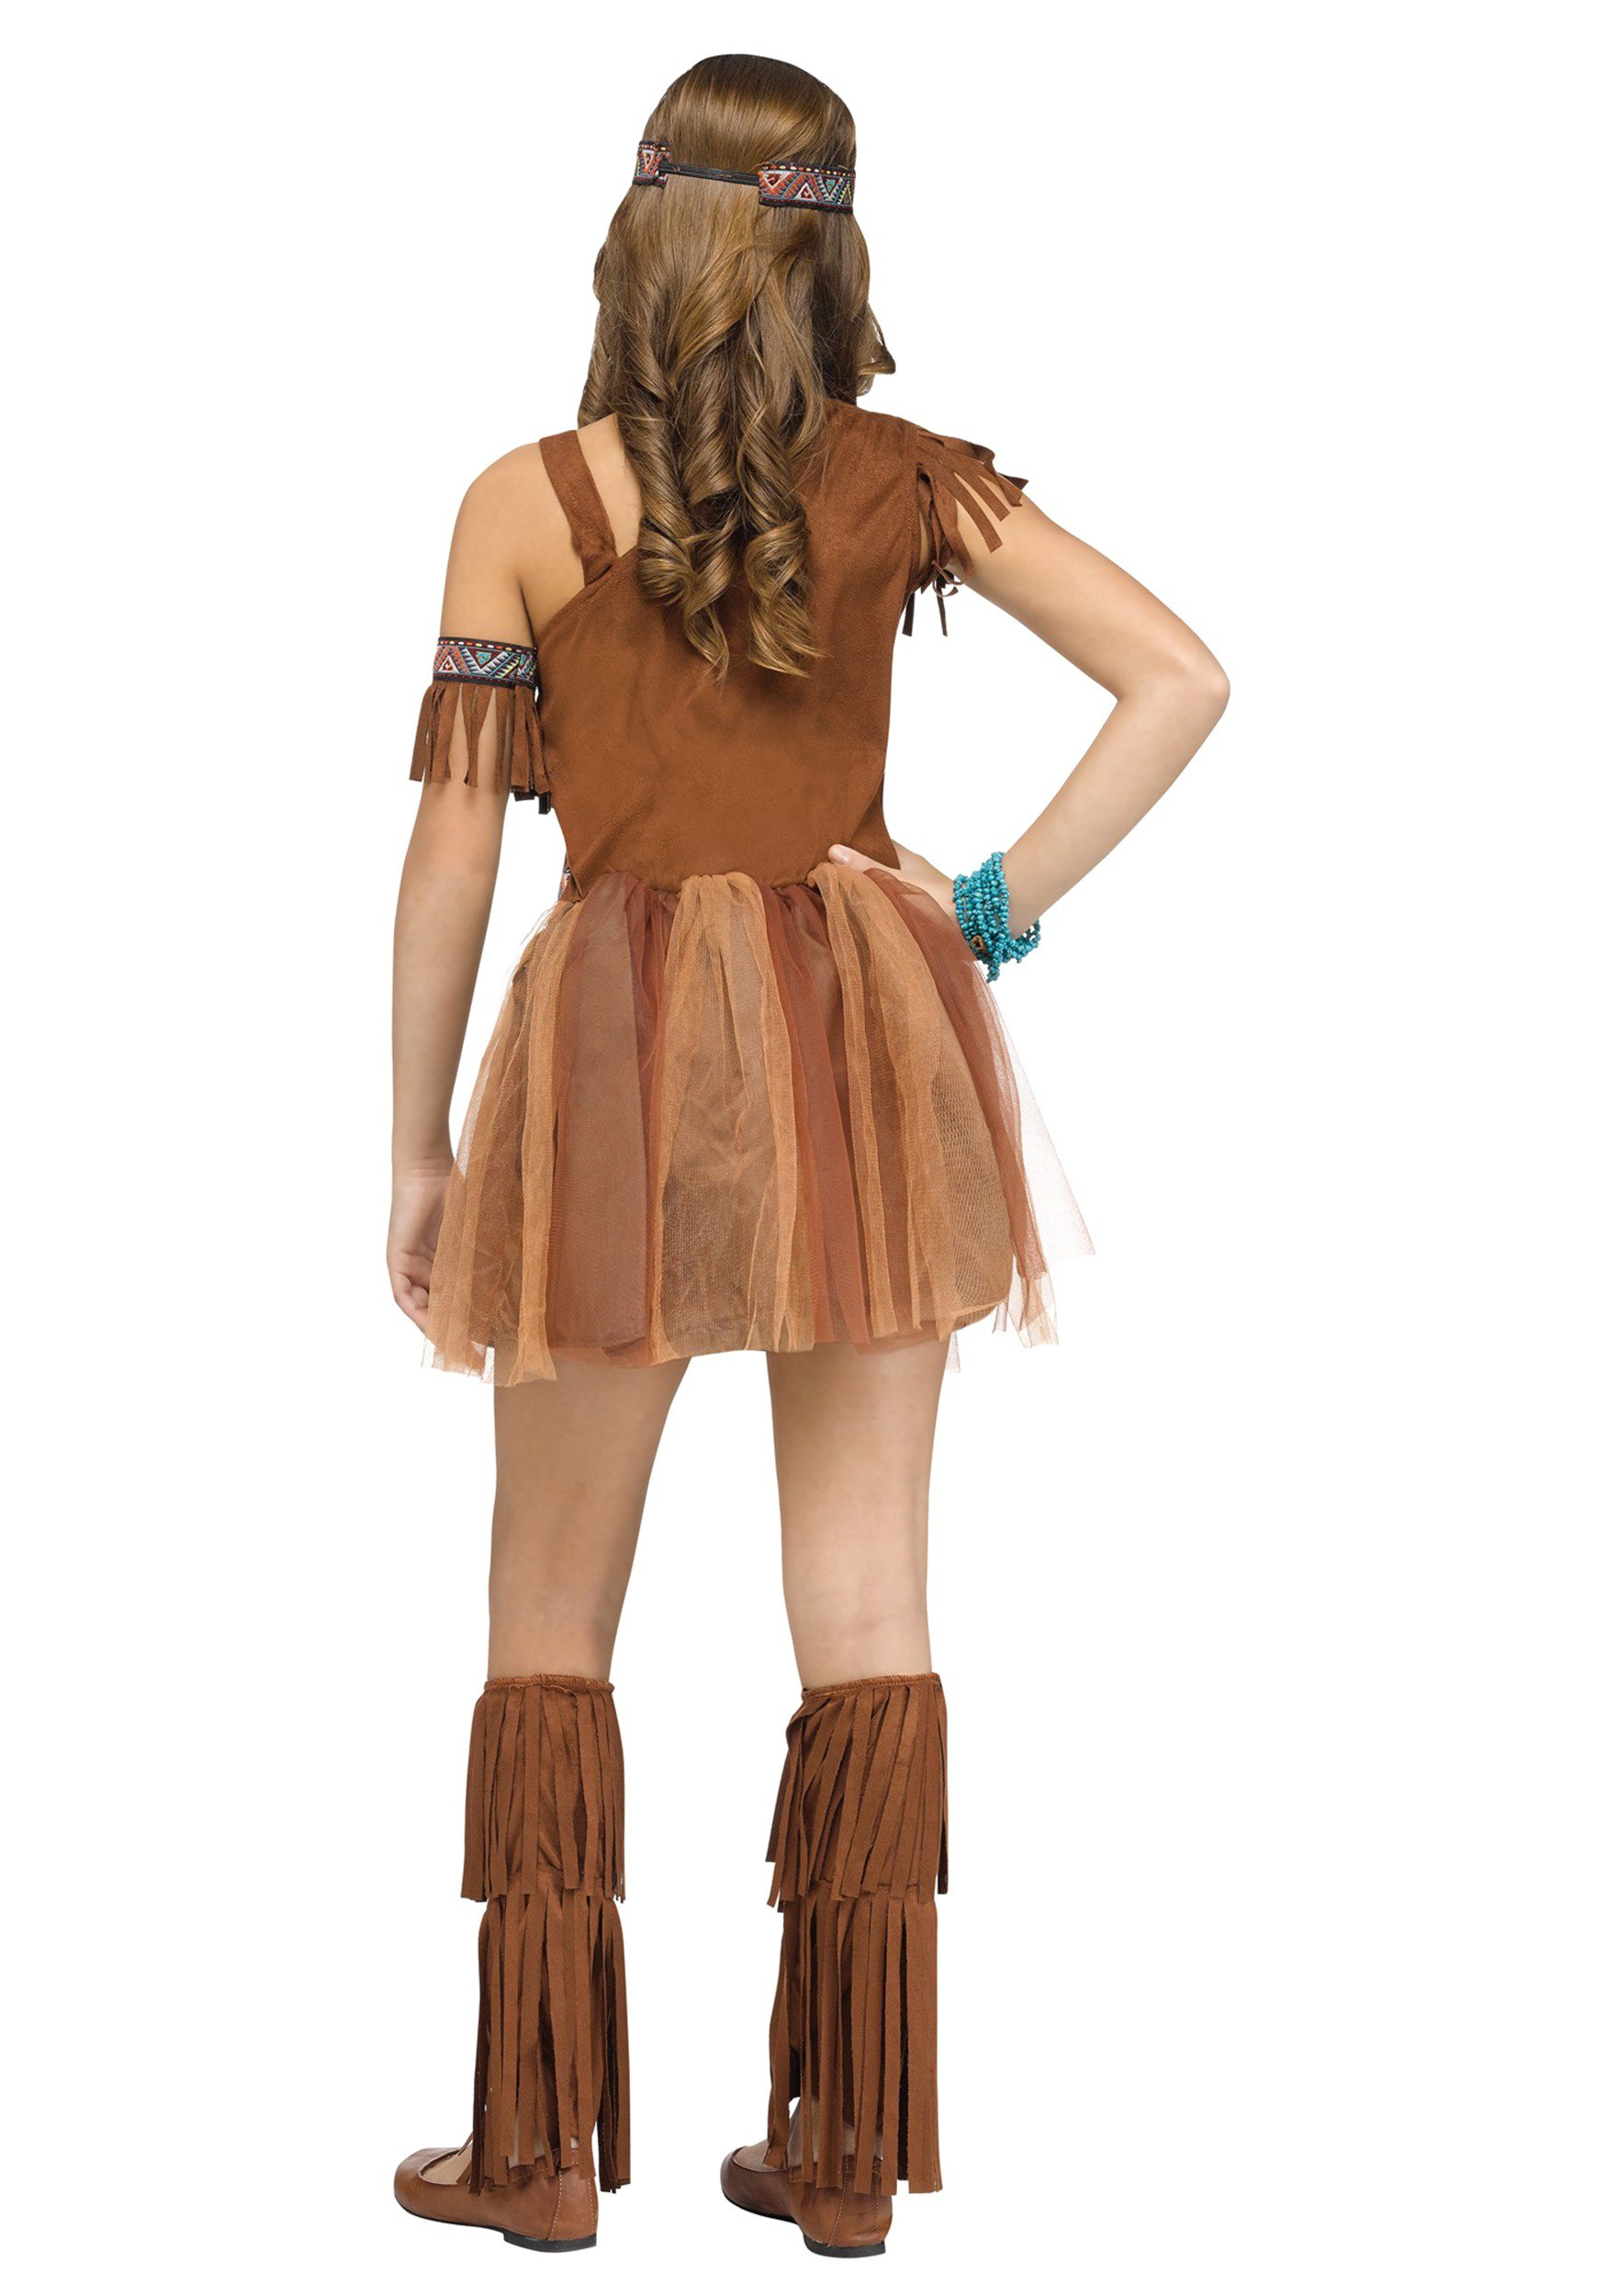 Classic Native American Costume For Girls